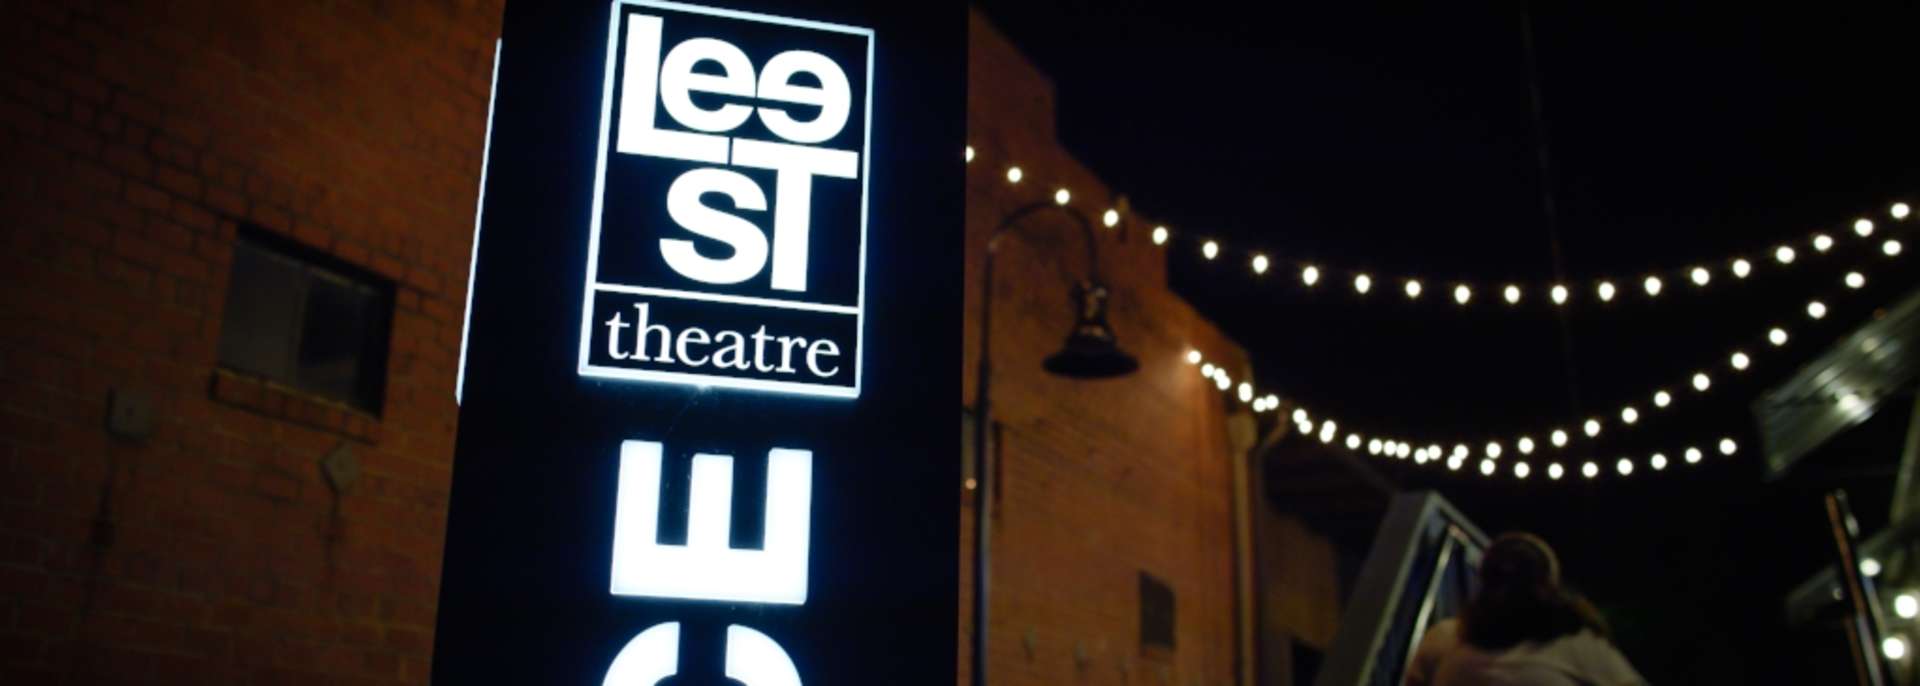 Lee St. Theater Sign lit up at night